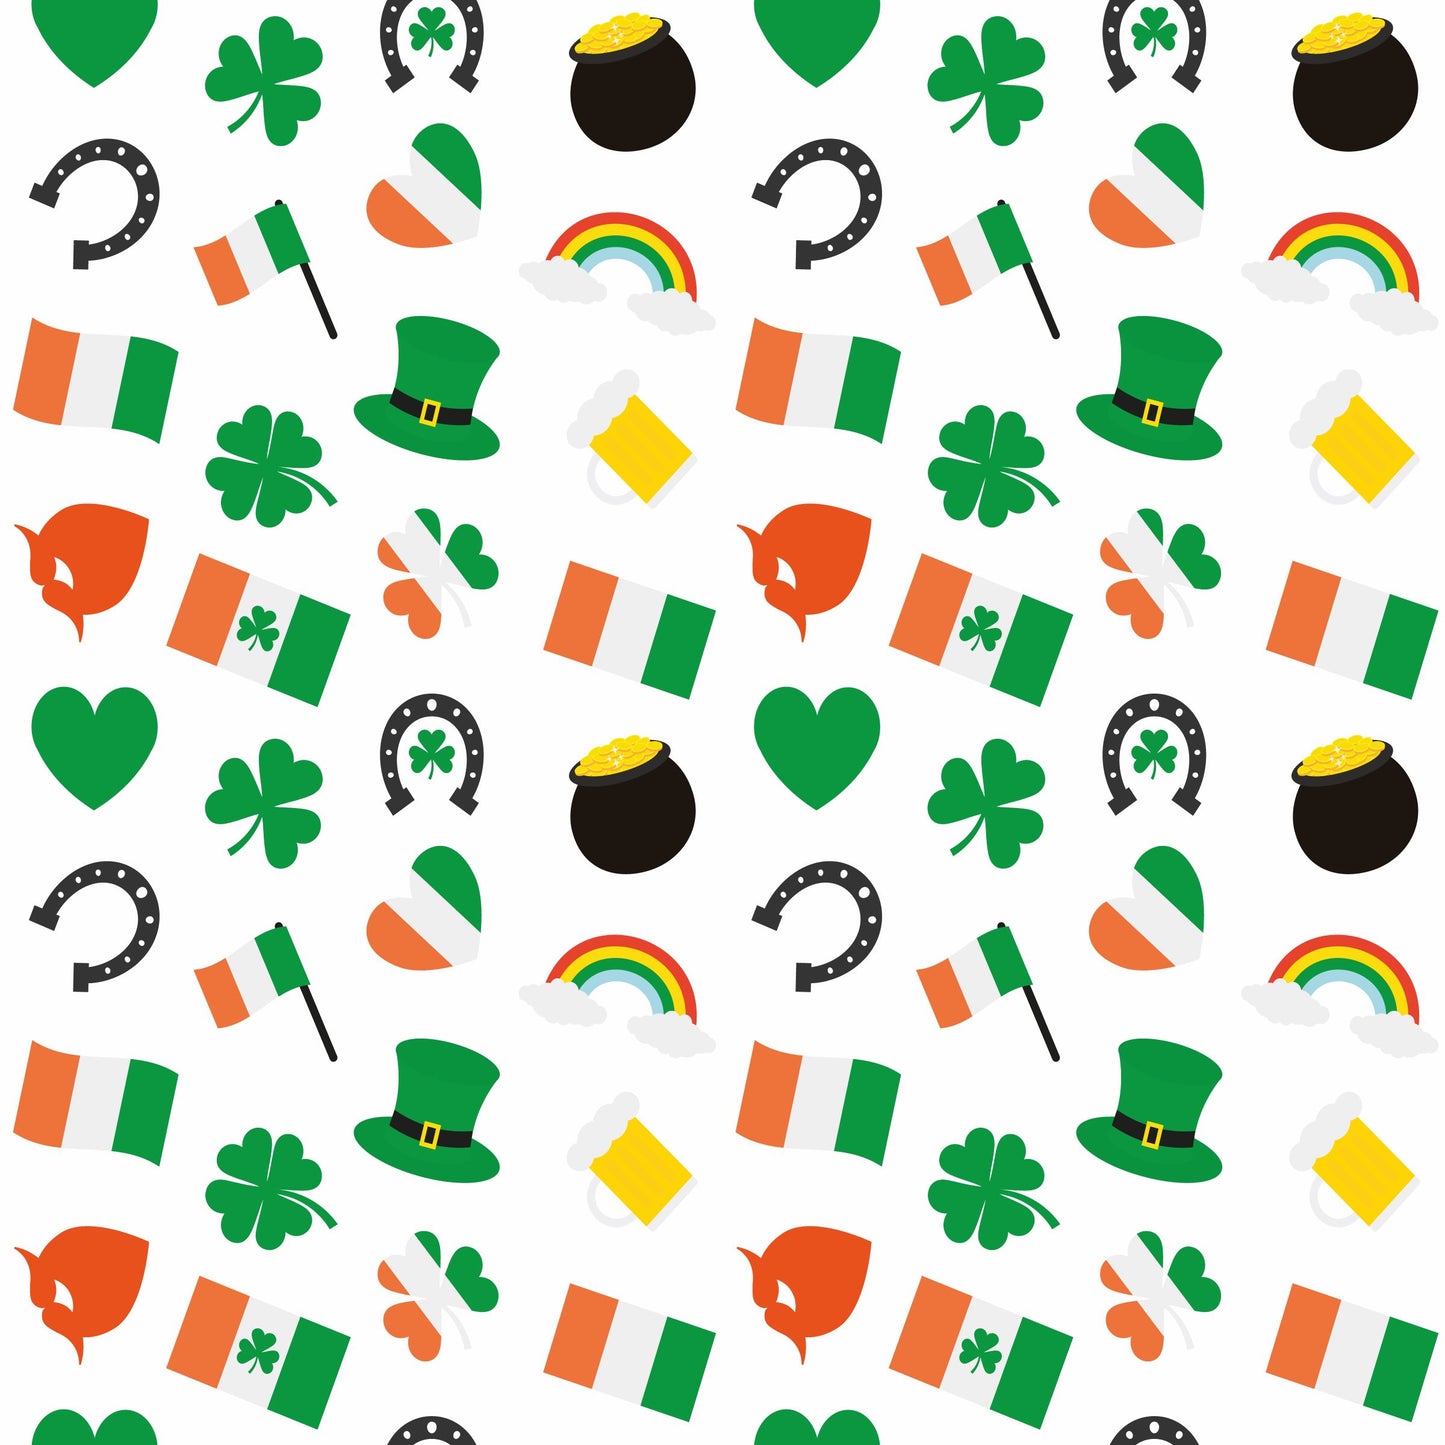 PATRICK'S DAY - GS0000135